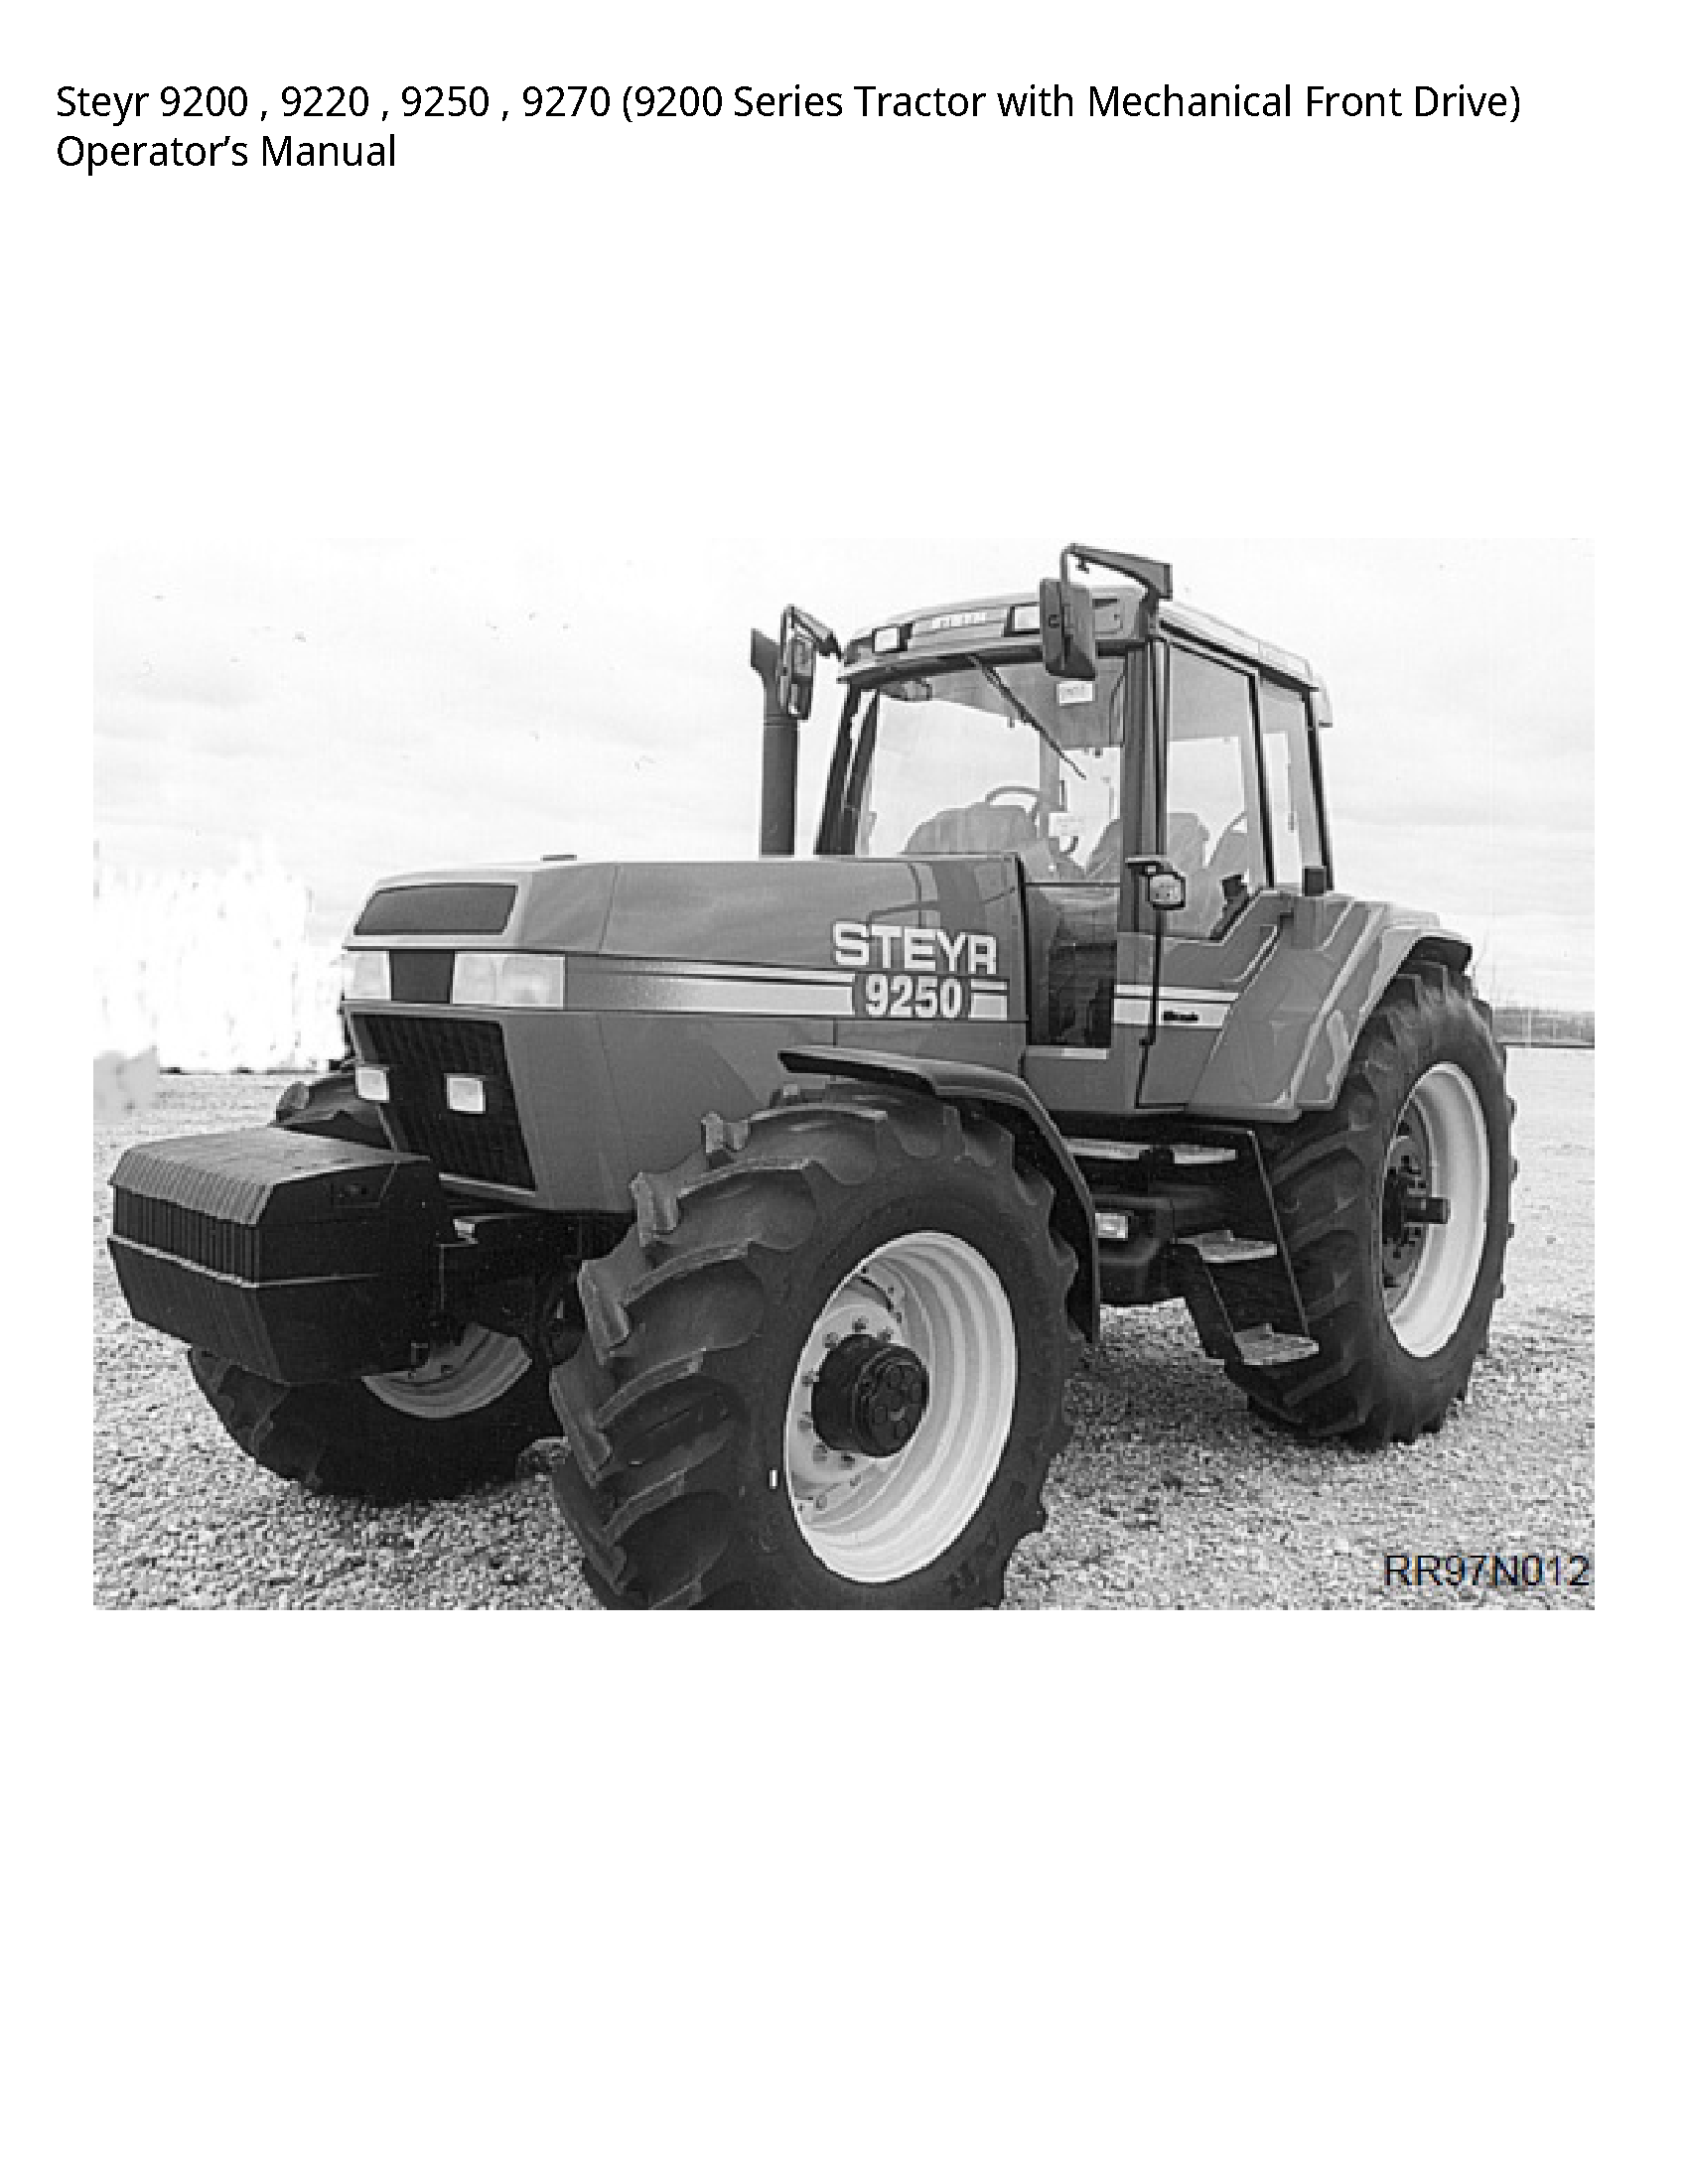 Steyr 9200 Series Tractor with Mechanical Front Drive) Operator’s manual